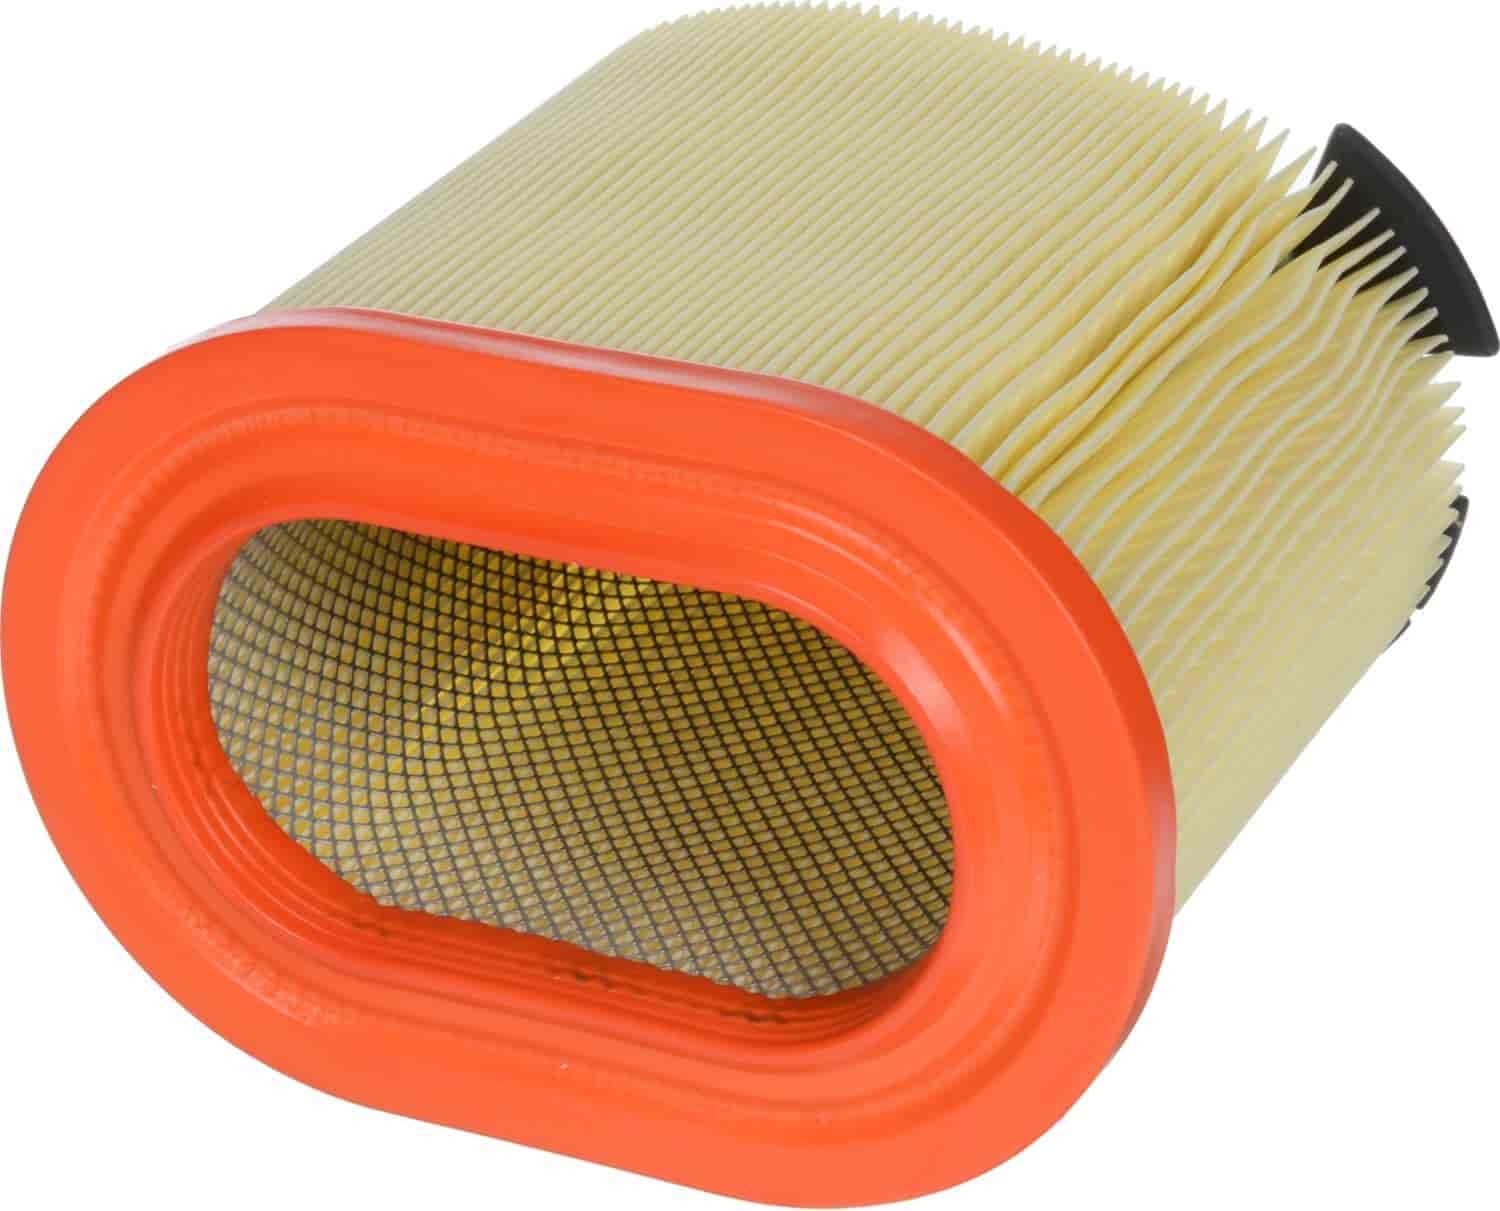 Extra Guard Oval Air Filter for 2017-2019 Ford F-250, F-350, F4-50, F-550 Super Duty